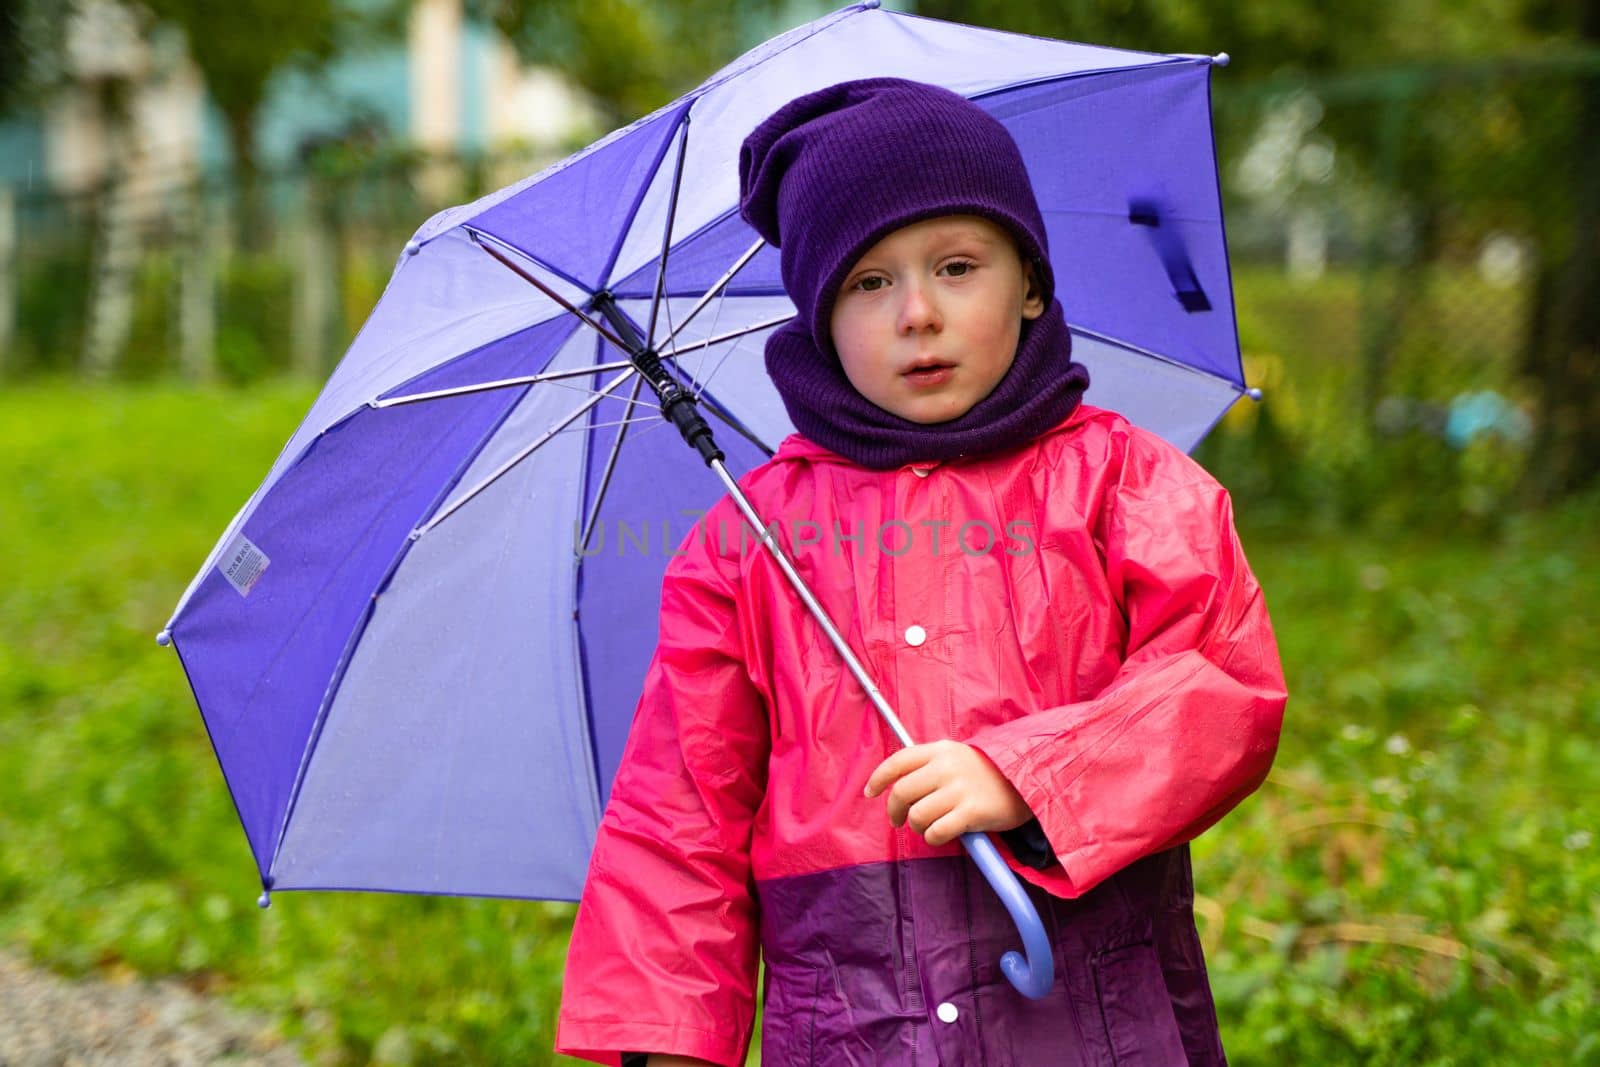 Child with an umbrella walks in the rain. Little boy with umbrella outdoors by voffka23